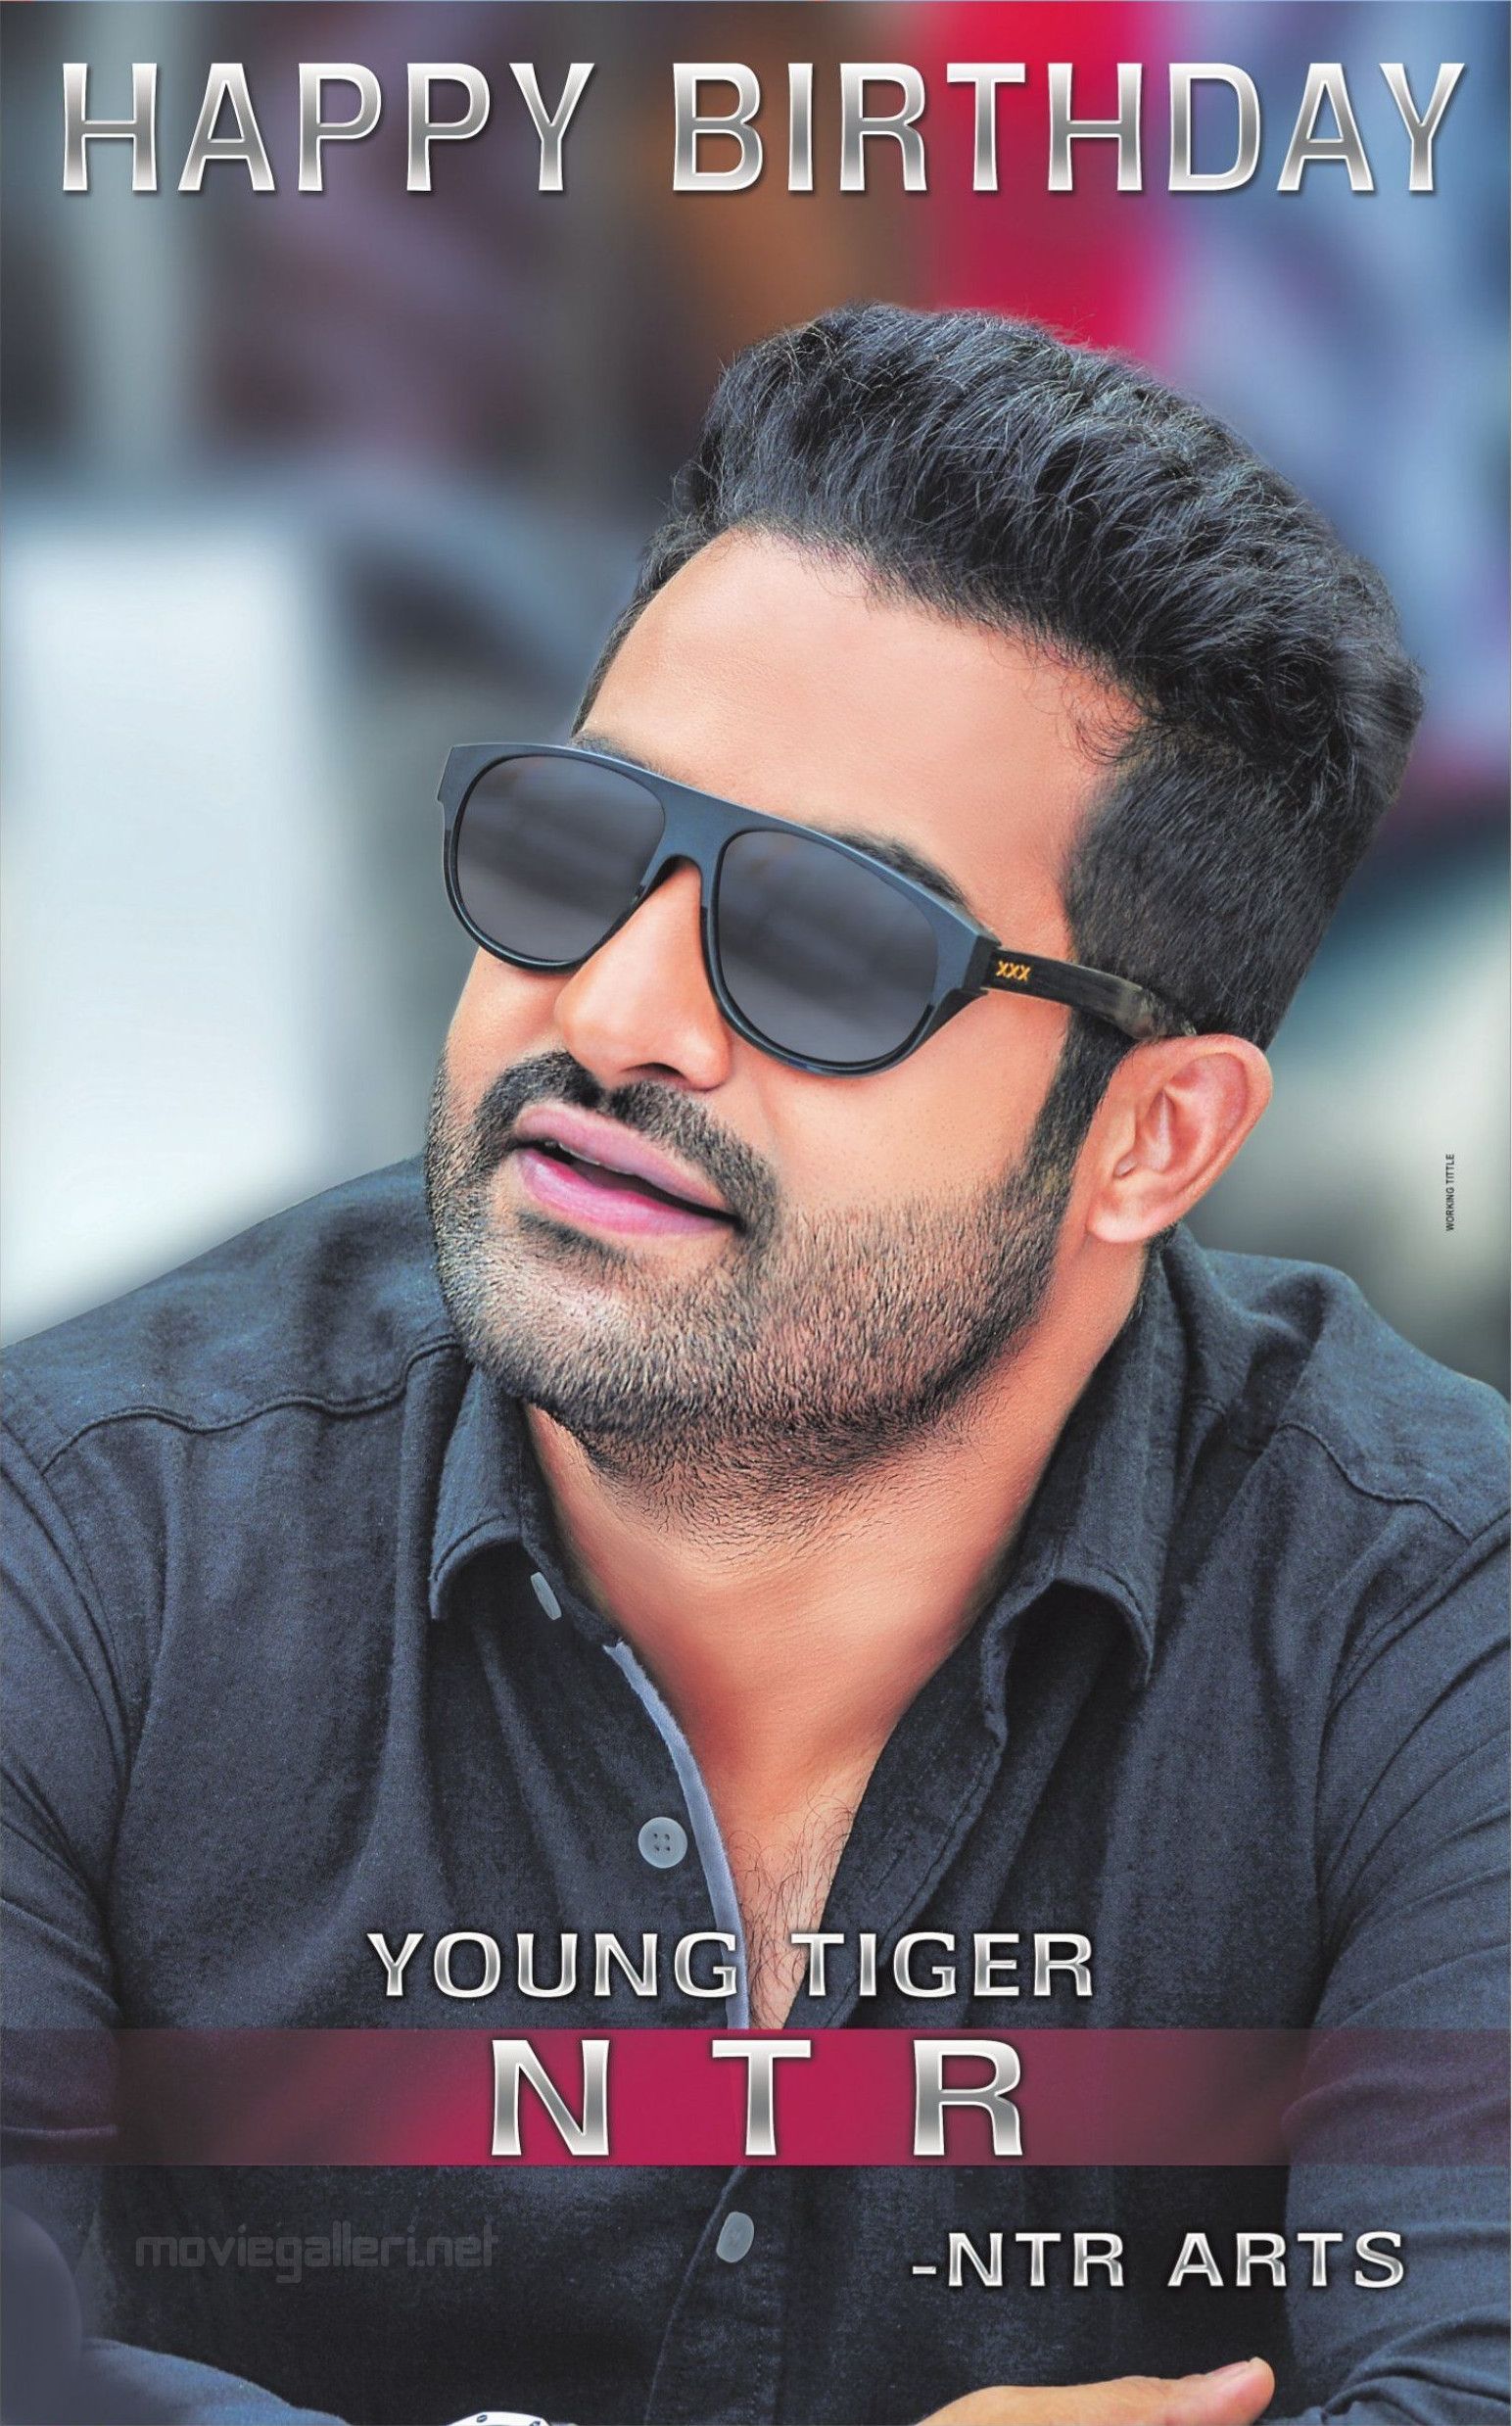 NTR Arts Wishes Jr NTR Birthday Poster HD. New Movie Posters